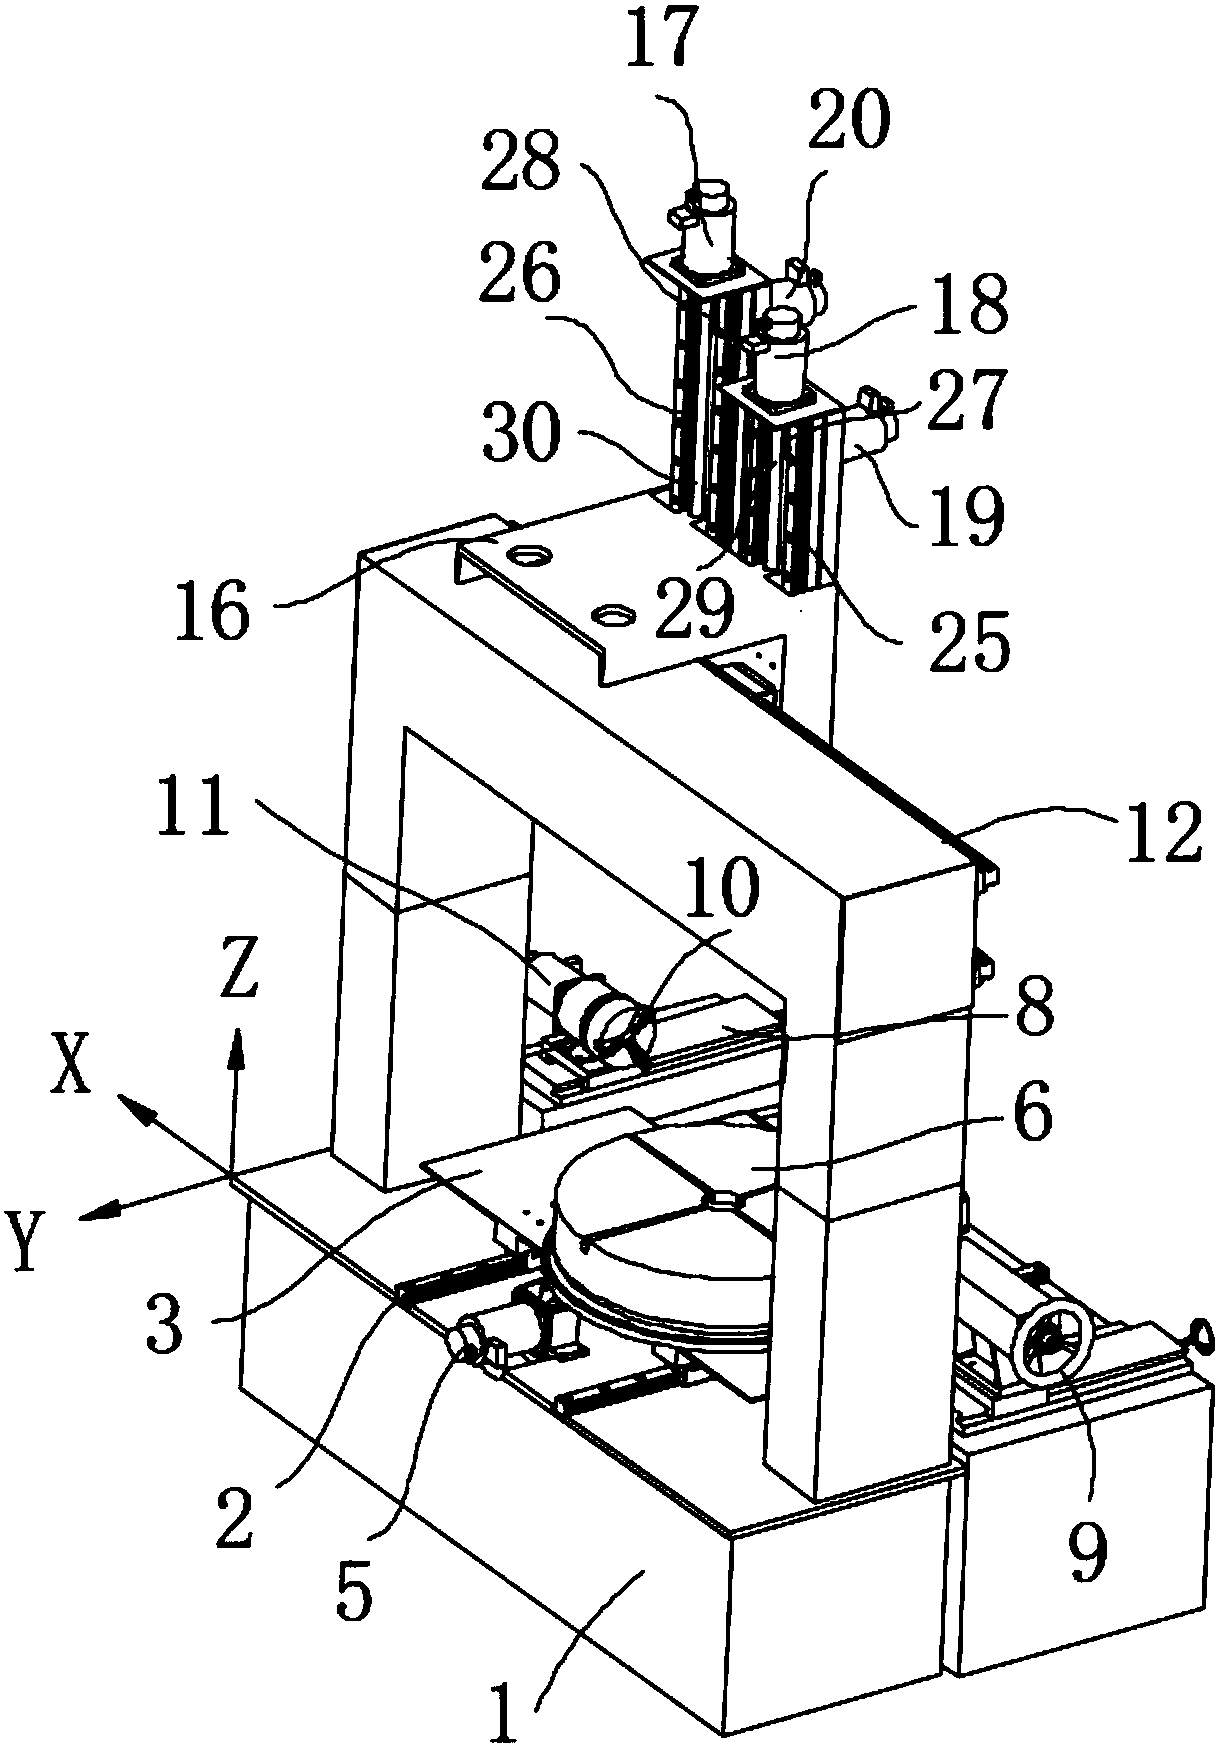 Additive and subtractive laser process machine tool and using method thereof